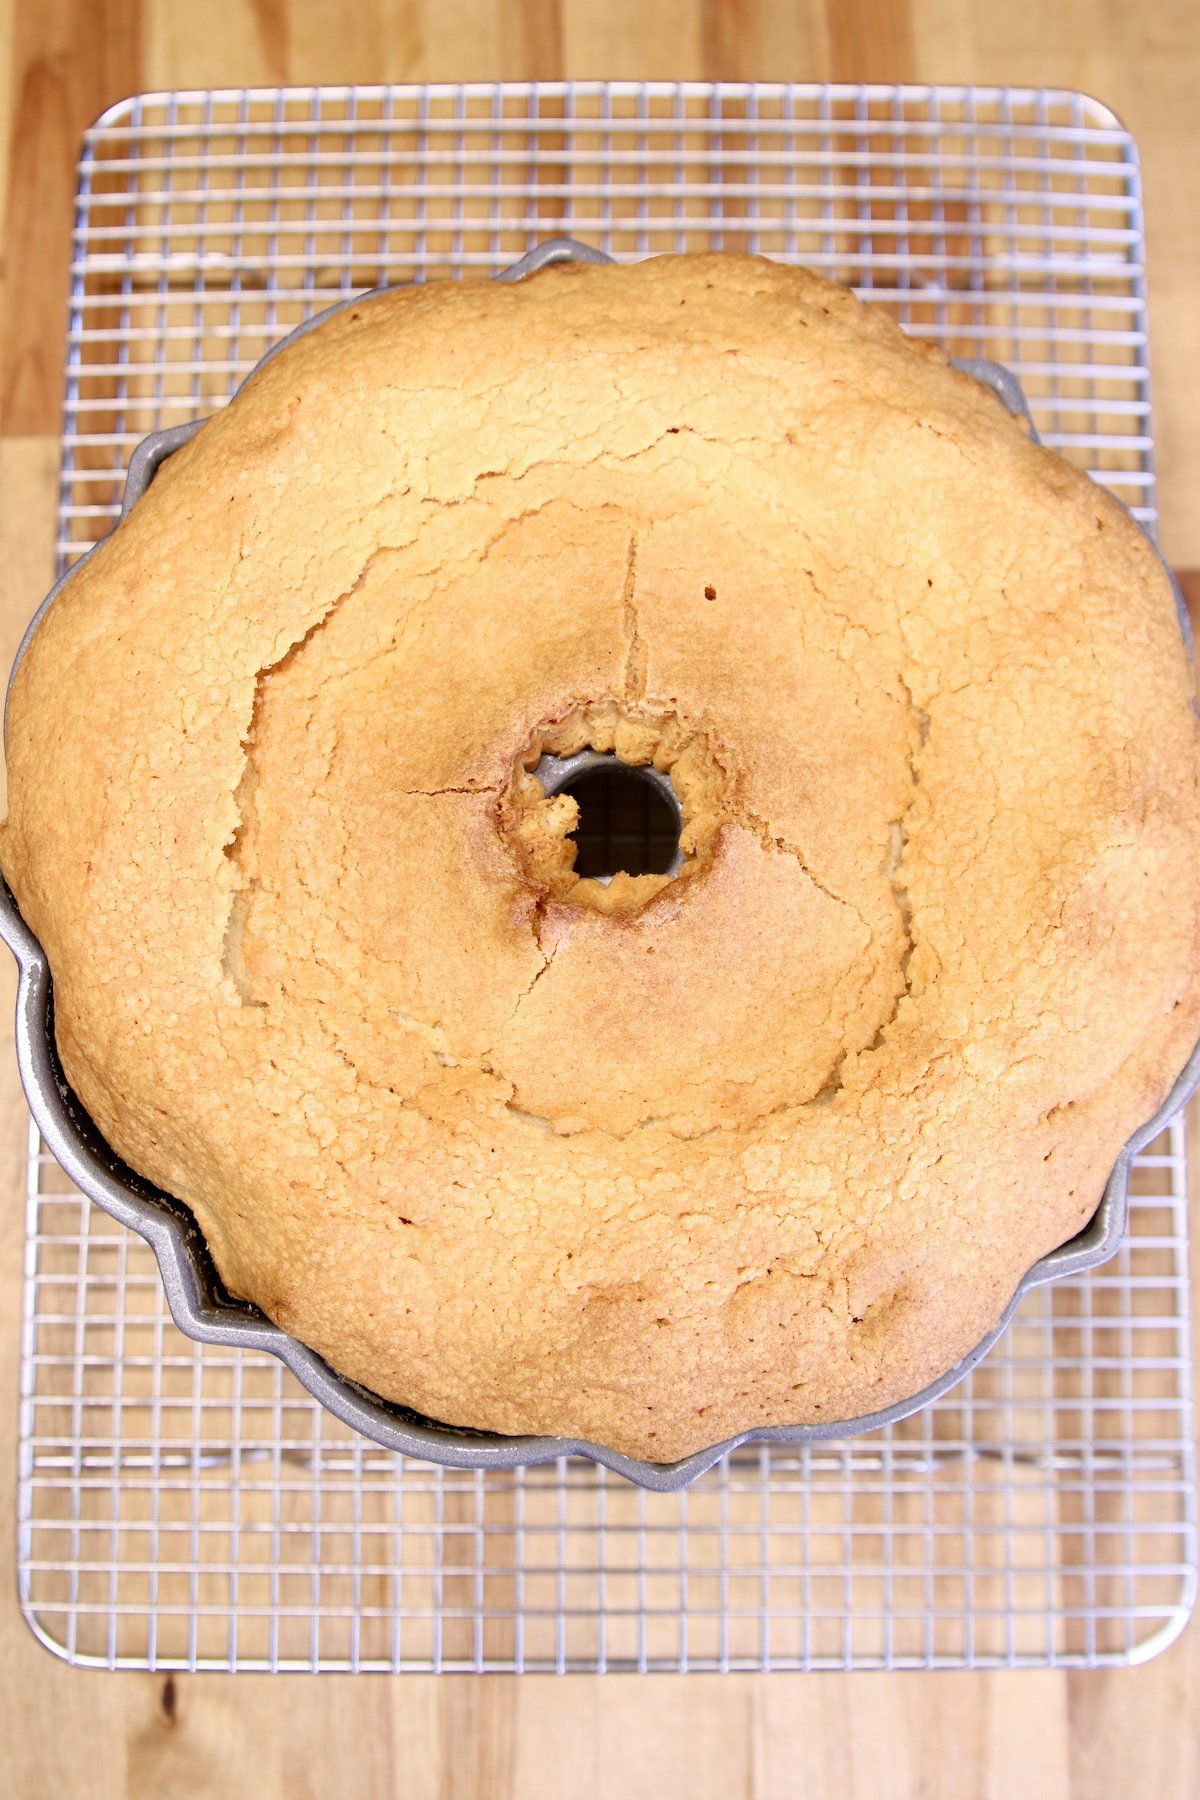 Baked pound cake in a bundt pan.